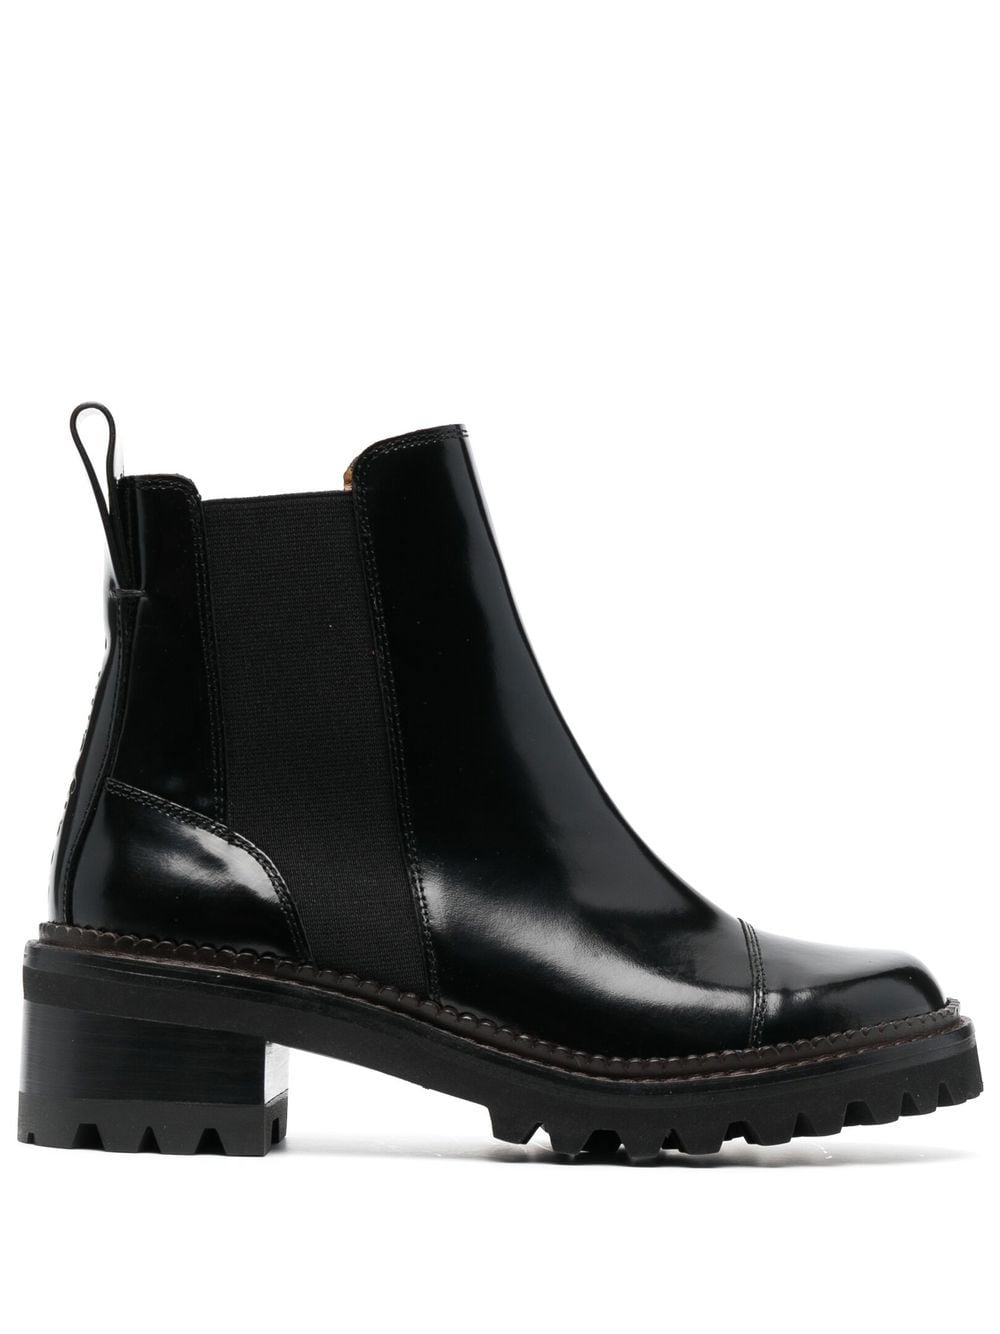 See by Chloé leather ankle boots - Black von See by Chloé